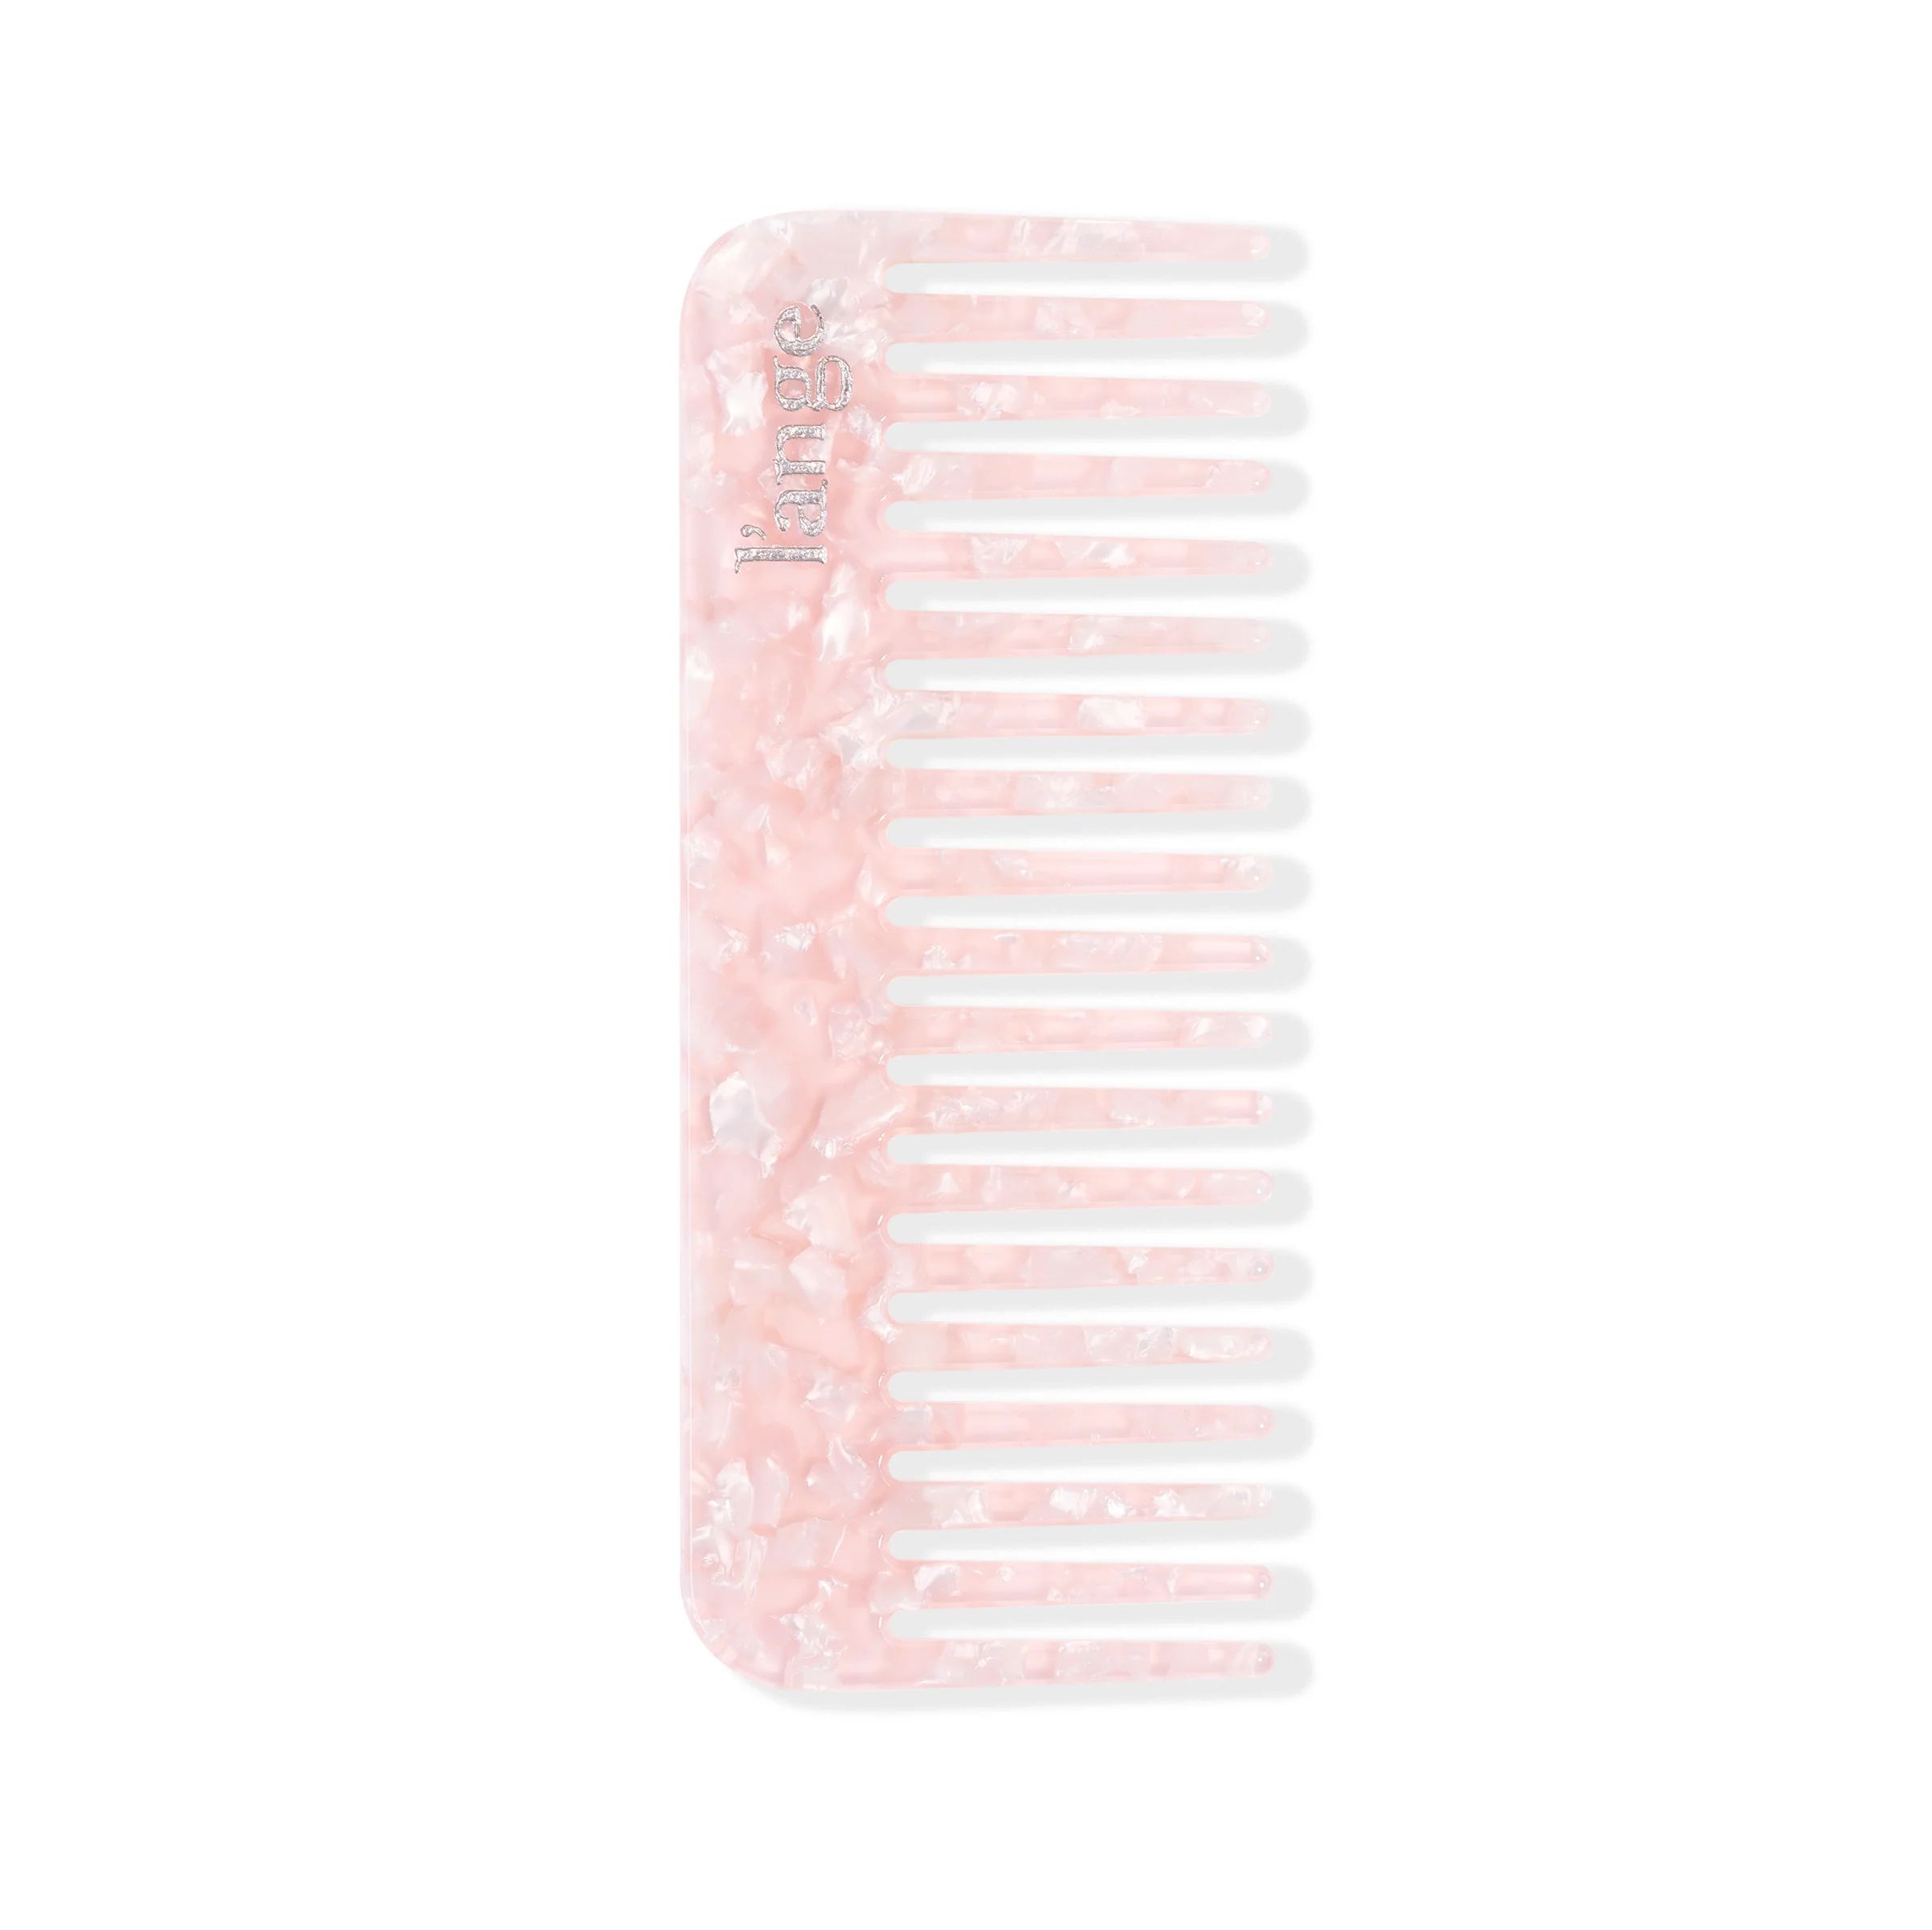 Wide Tooth Comb Blush Acetate | L'ange Hair